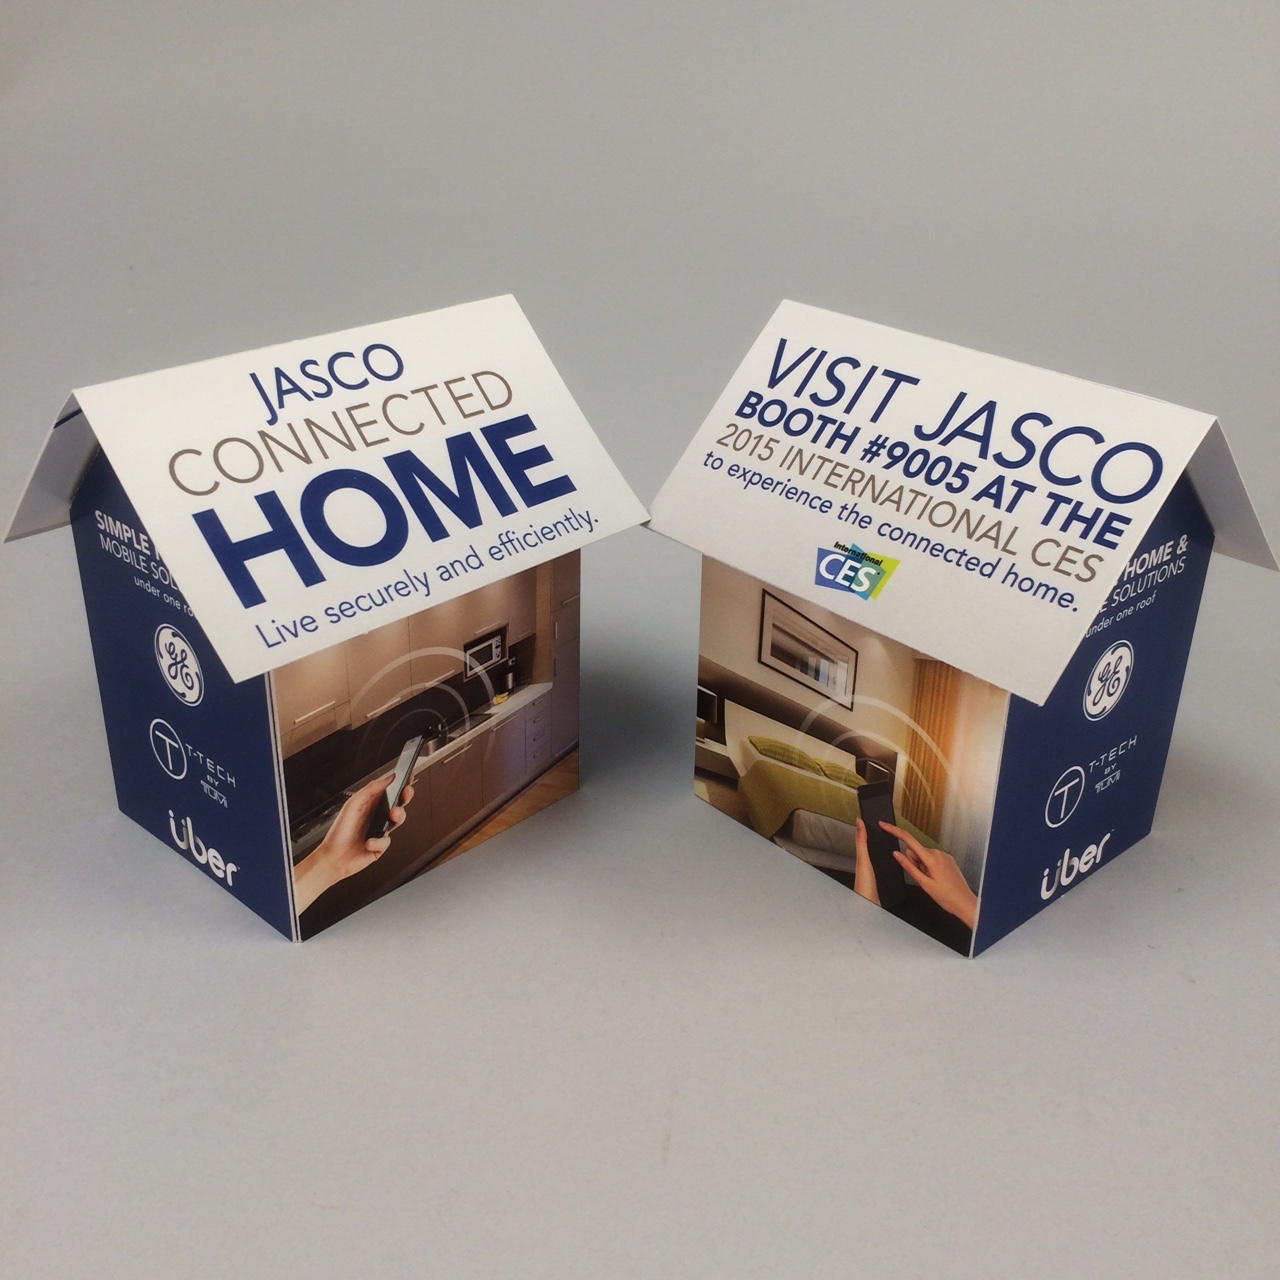 Jasco Uses Pop-Up House to Connect with Attendees